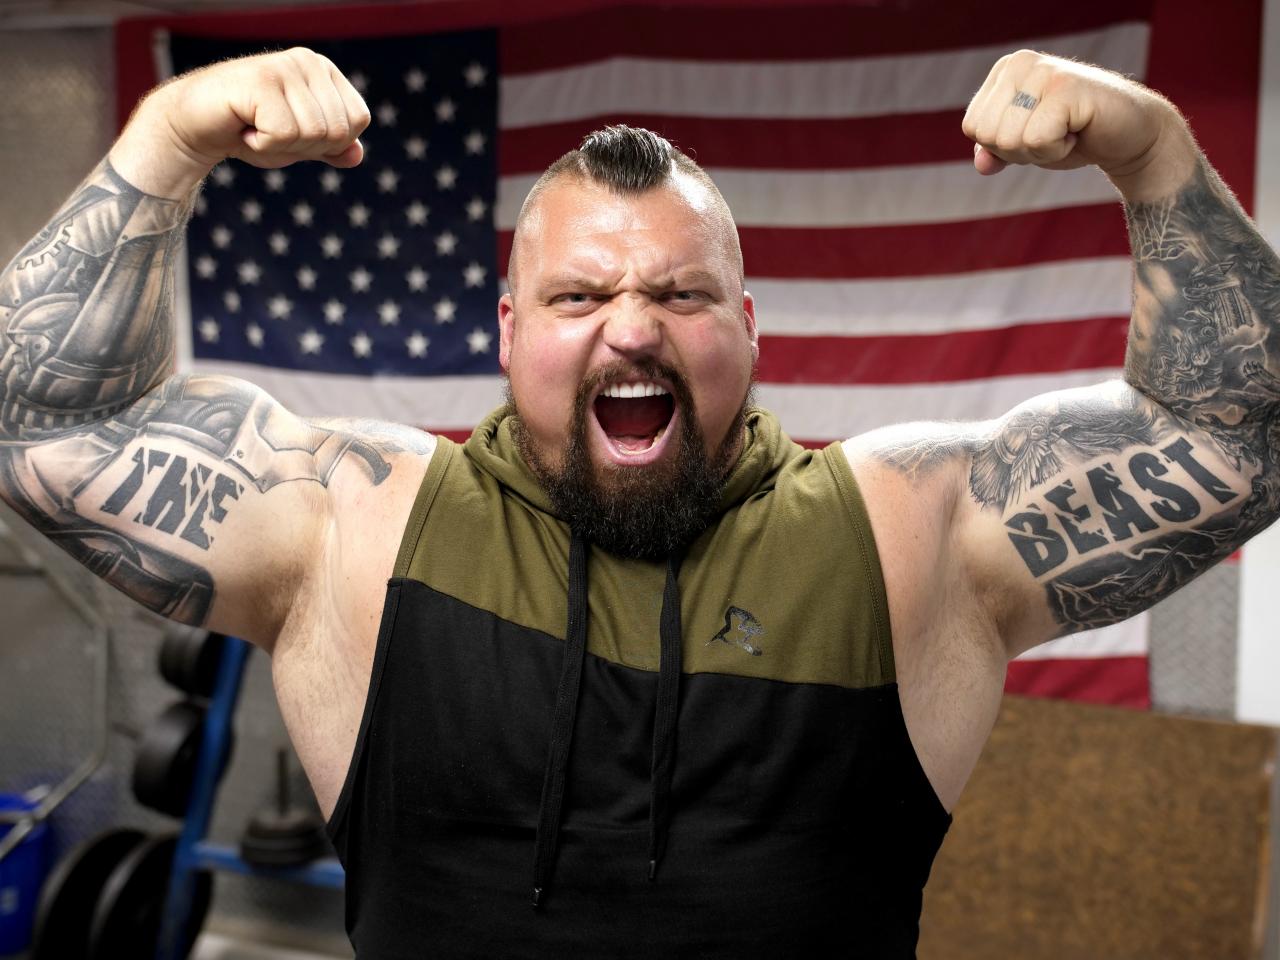 Eddie Hall flexing his muscles in front of the USA flag, as seen on Eddie E...